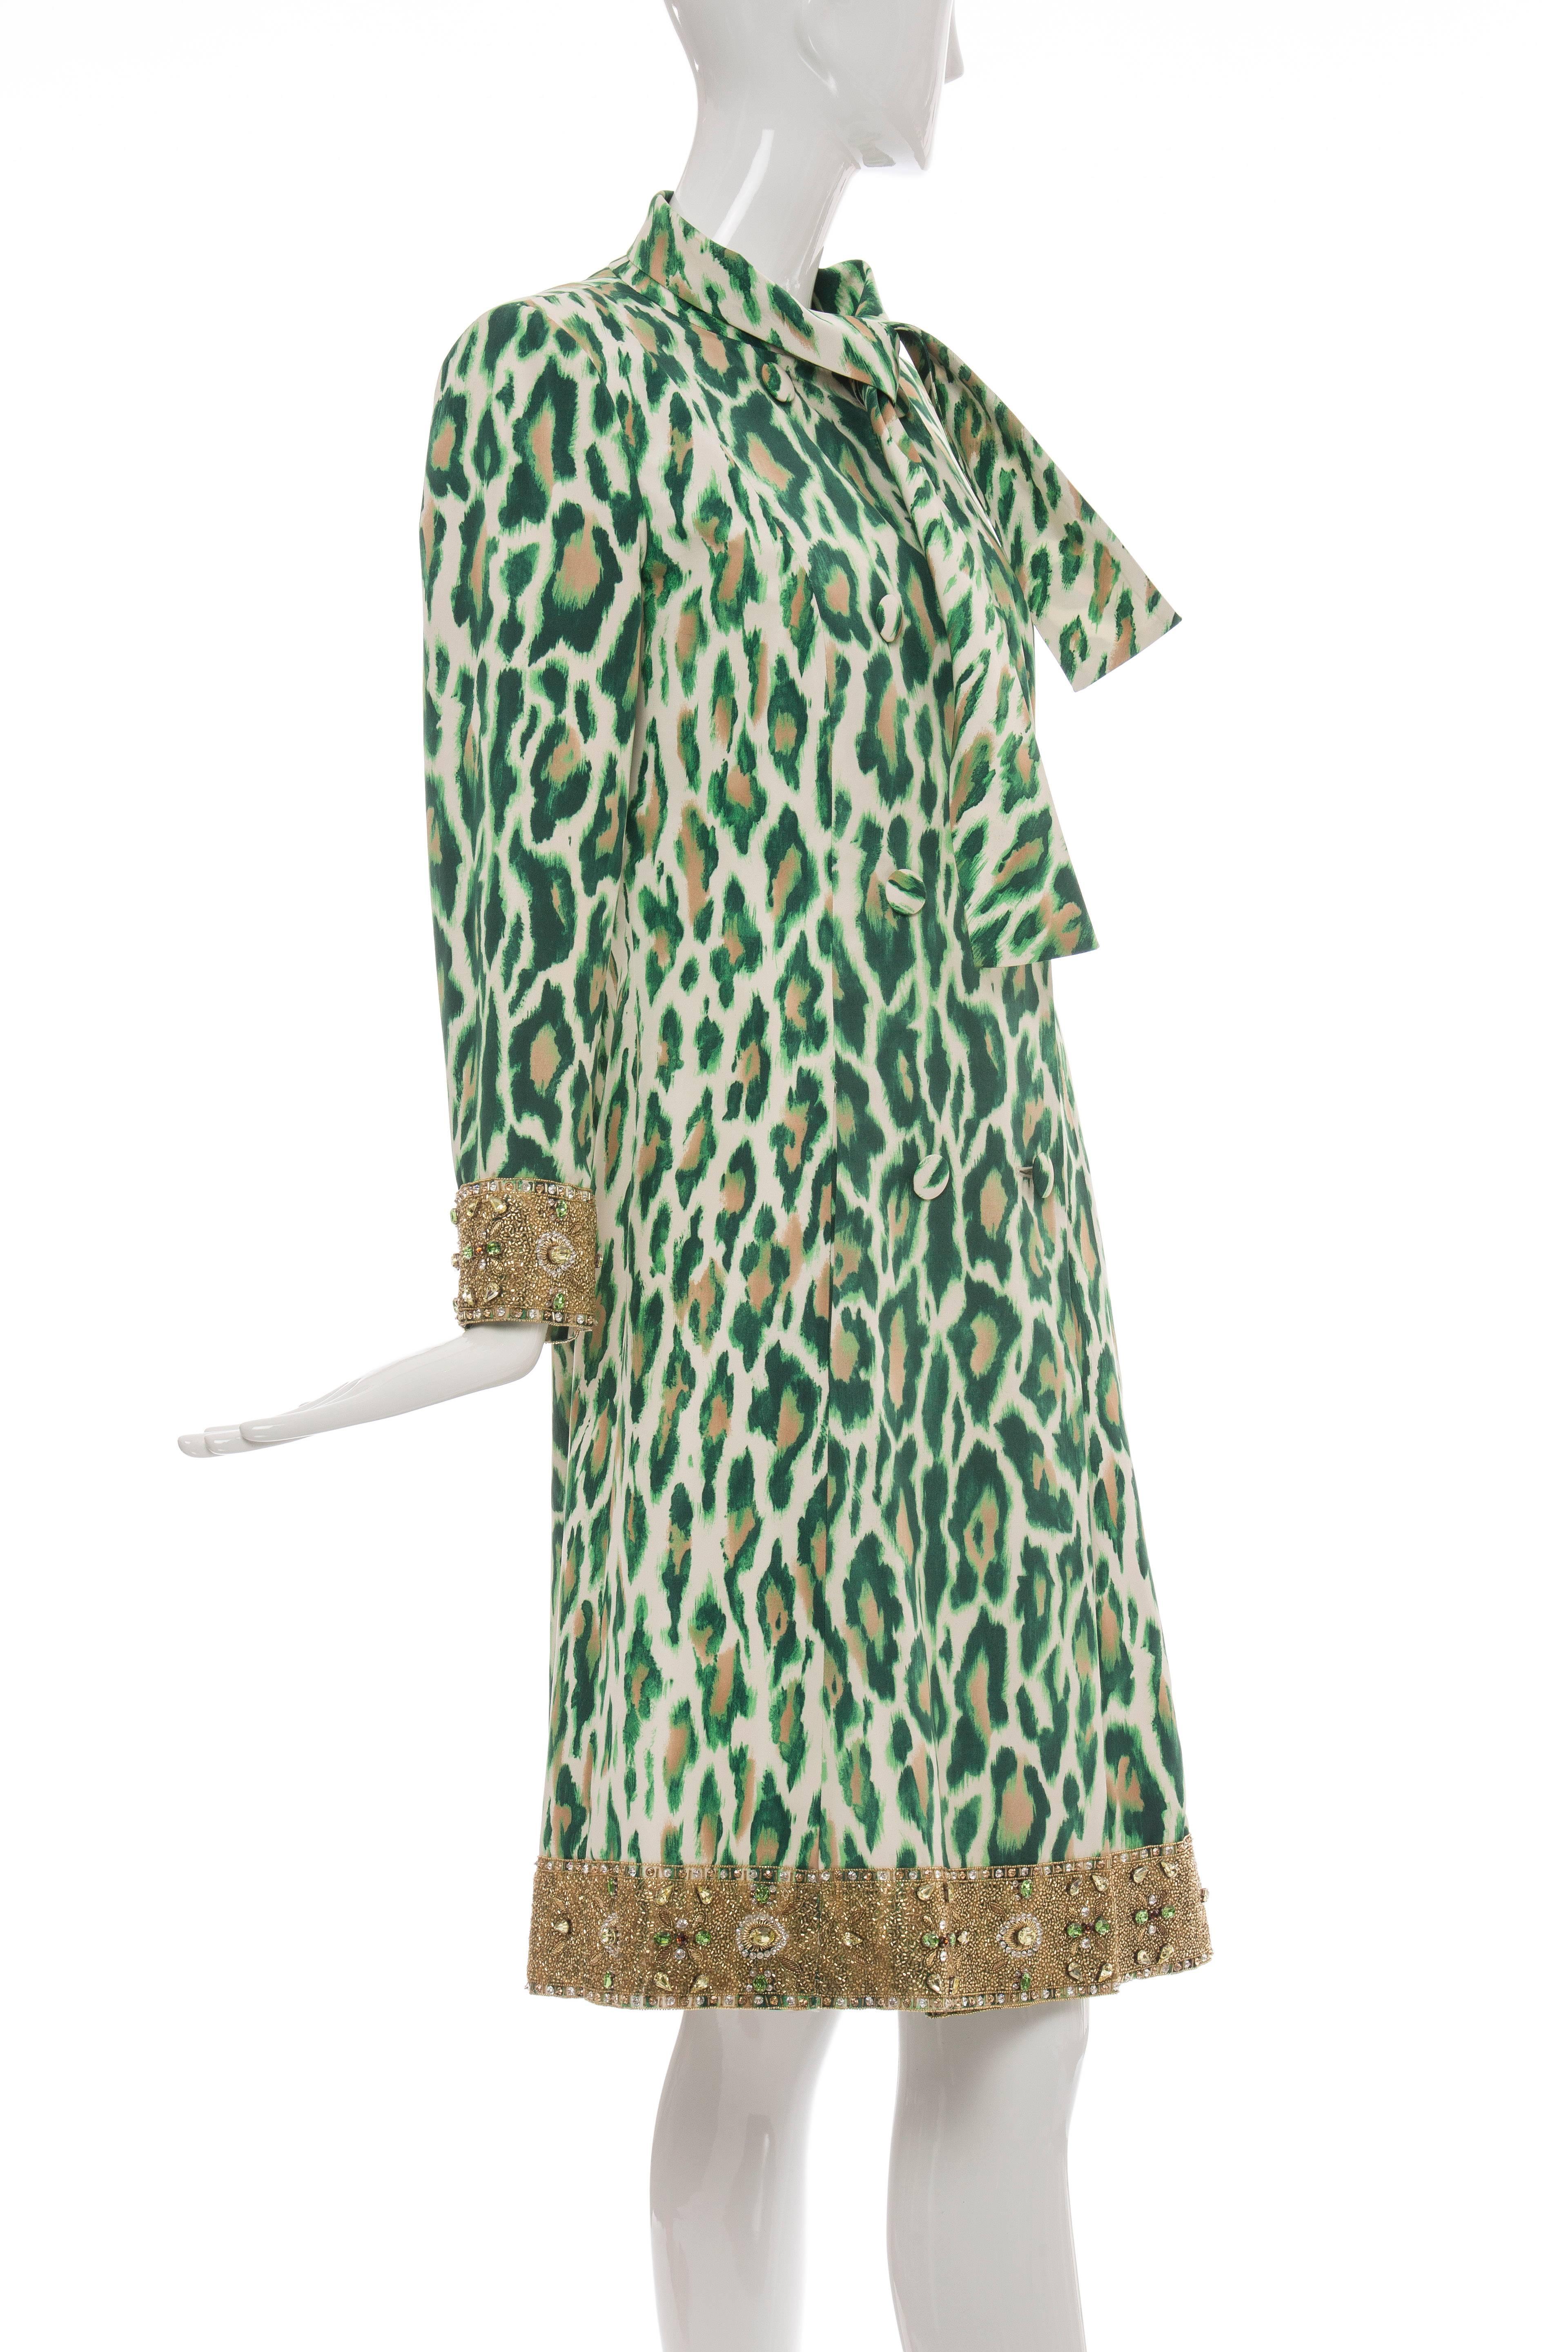 Christian Dior By John Galliano Silk Embellished Leopard Coat, Resort 2008  In Excellent Condition In Cincinnati, OH